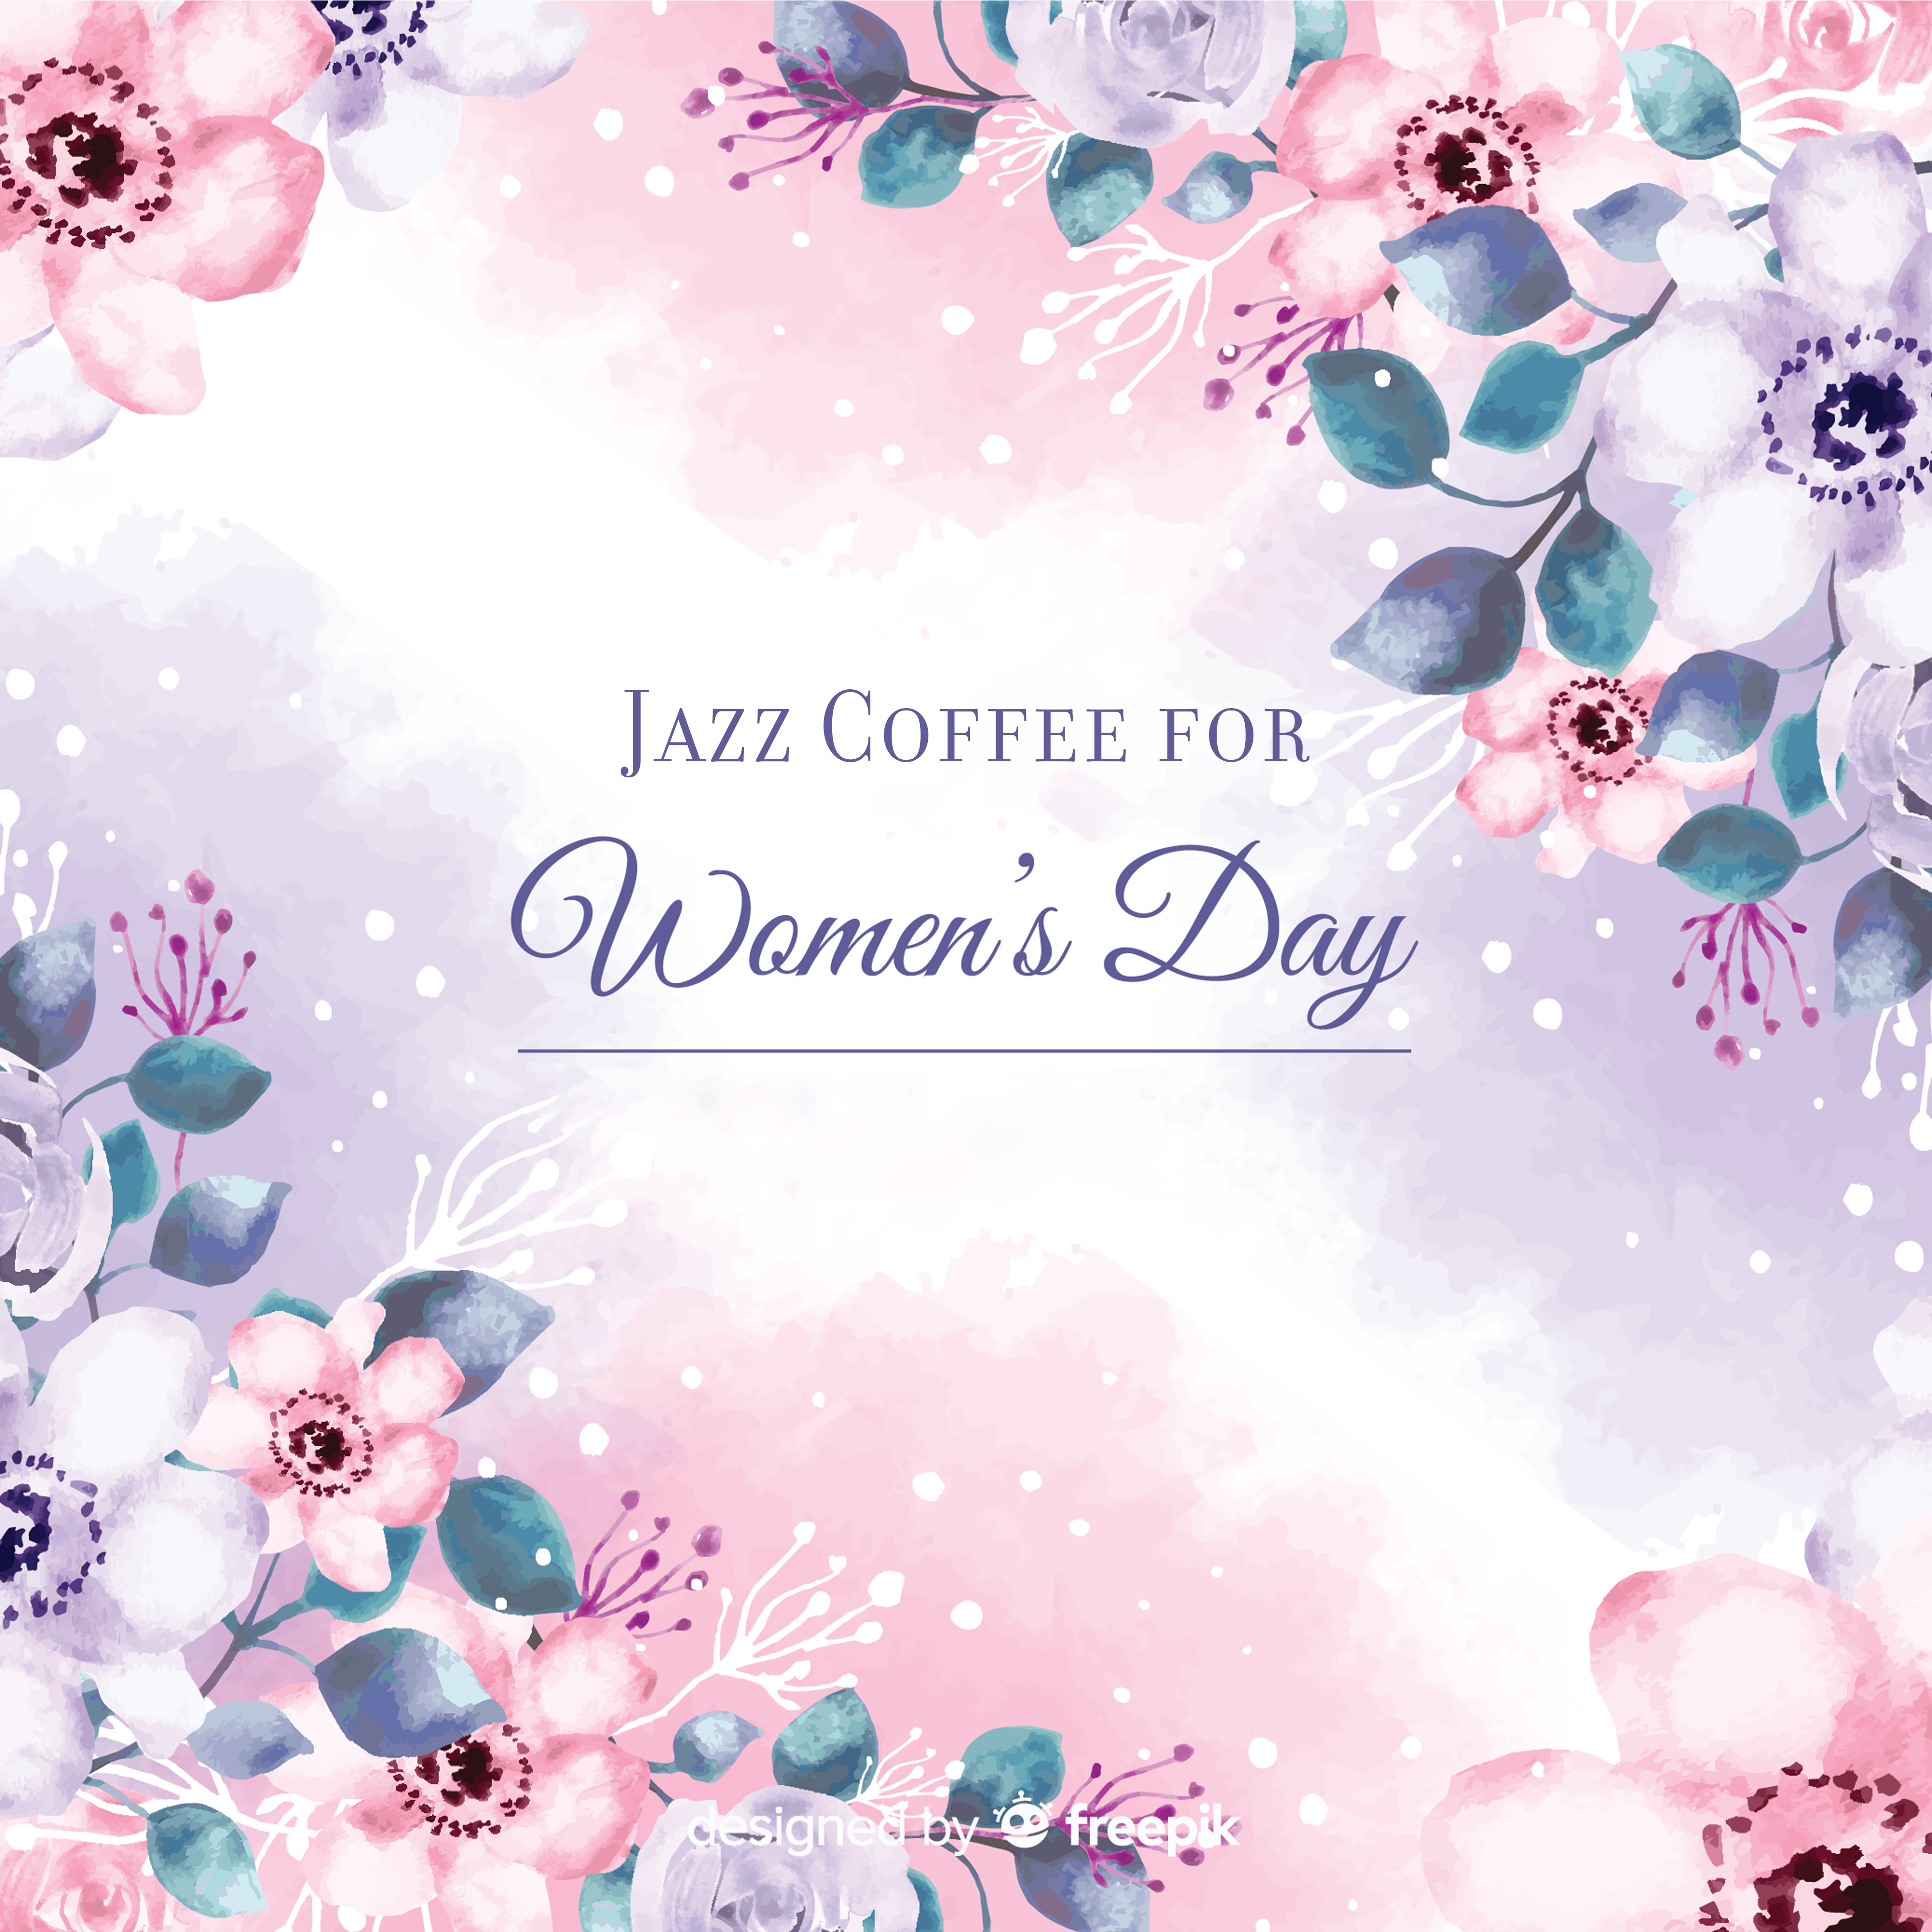 Jazz Coffee for Women's Day – Relaxing Jazz, Instrumental Music to Calm Down, Jazz Vibes, Coffee Music